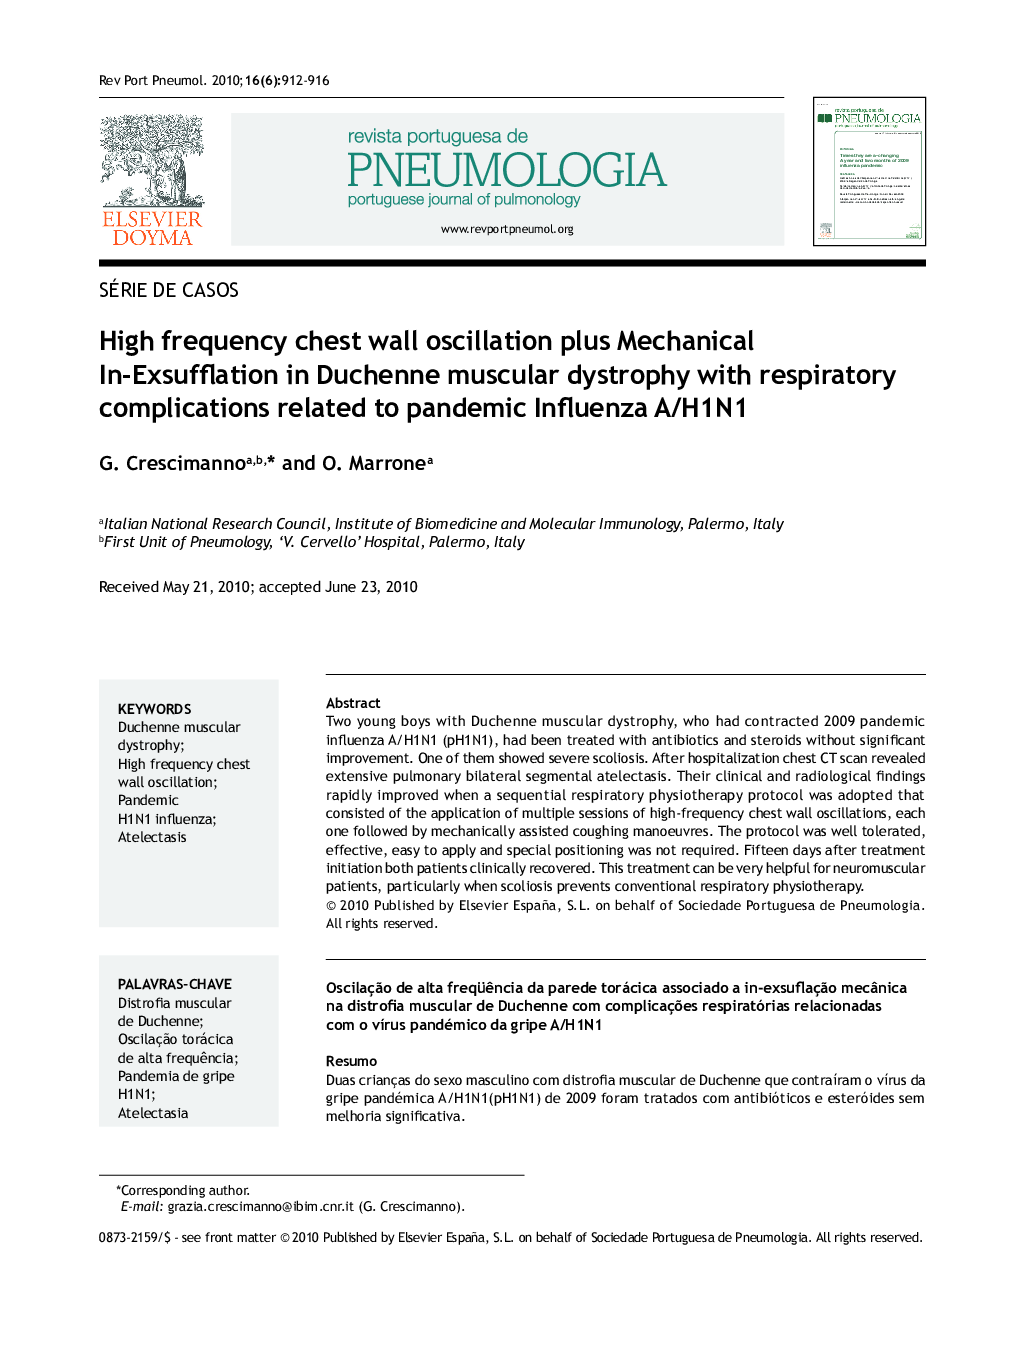 High frequency chest wall oscillation plus Mechanical In-Exsufflation in Duchenne muscular dystrophy with respiratory complications related to pandemic Influenza A/H1N1